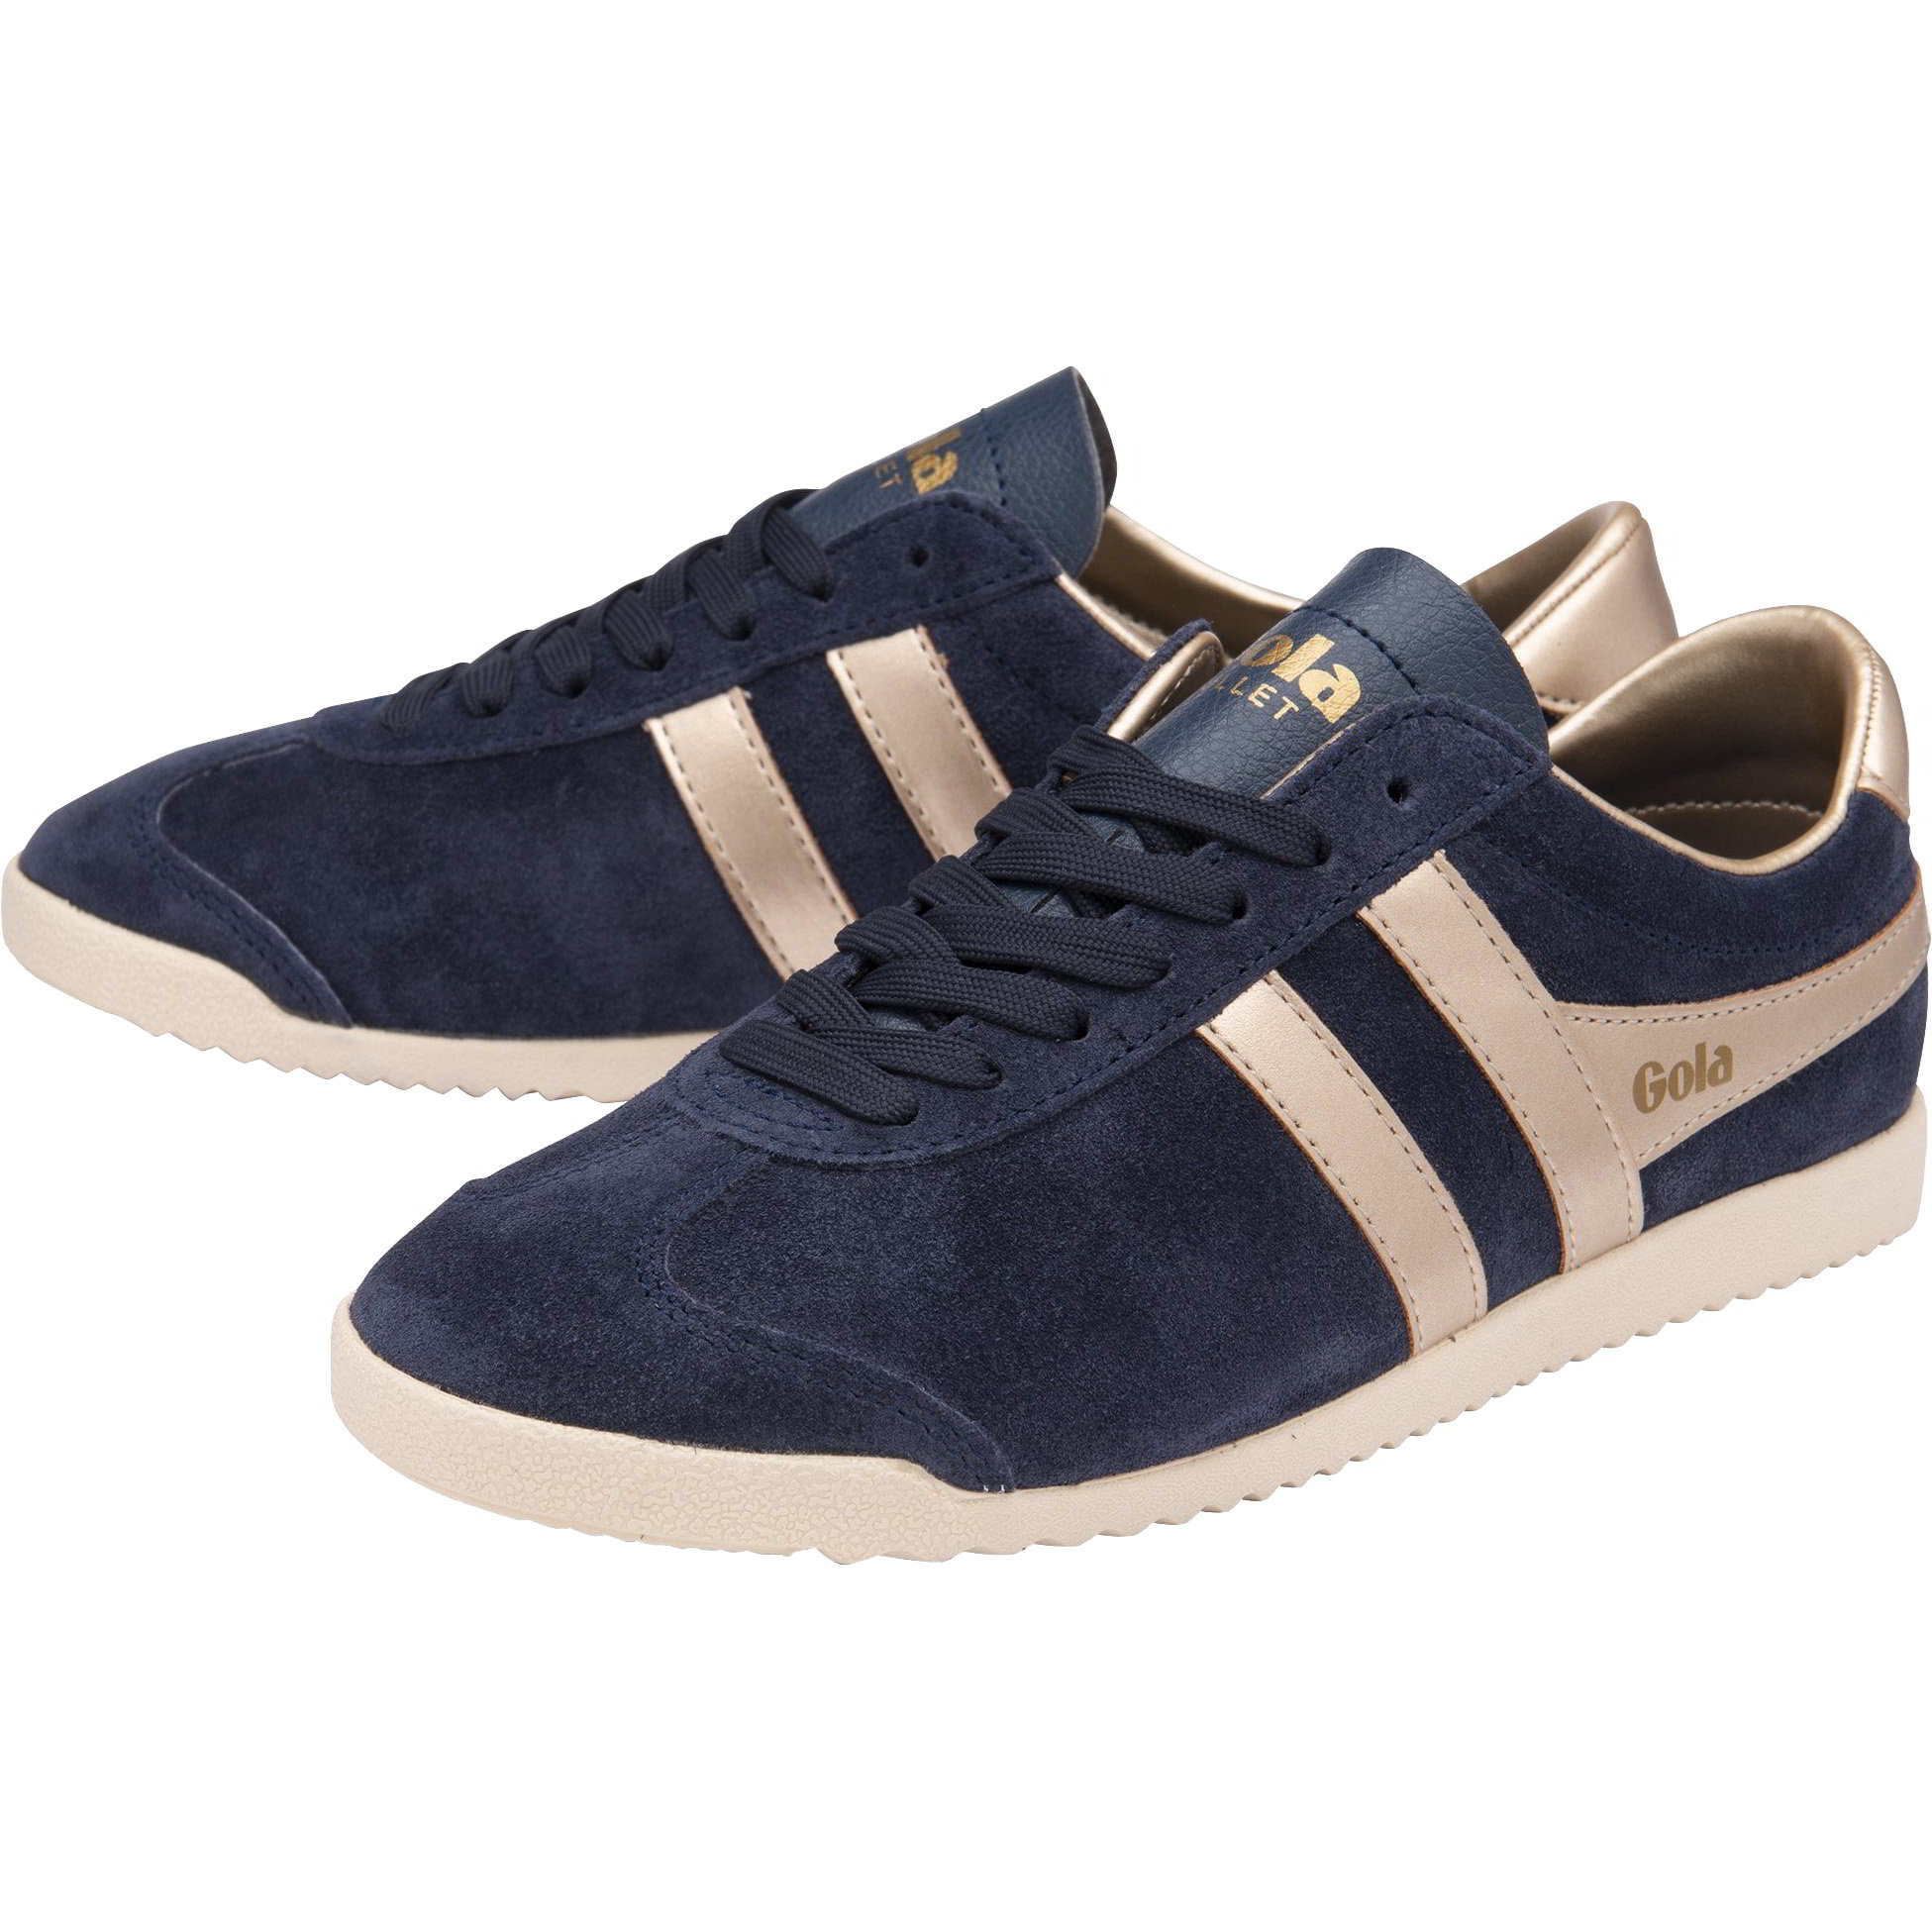 Gola Womens Bullet Pearl Classics Suede Trainers Shoes - UK 4 Blue 2951